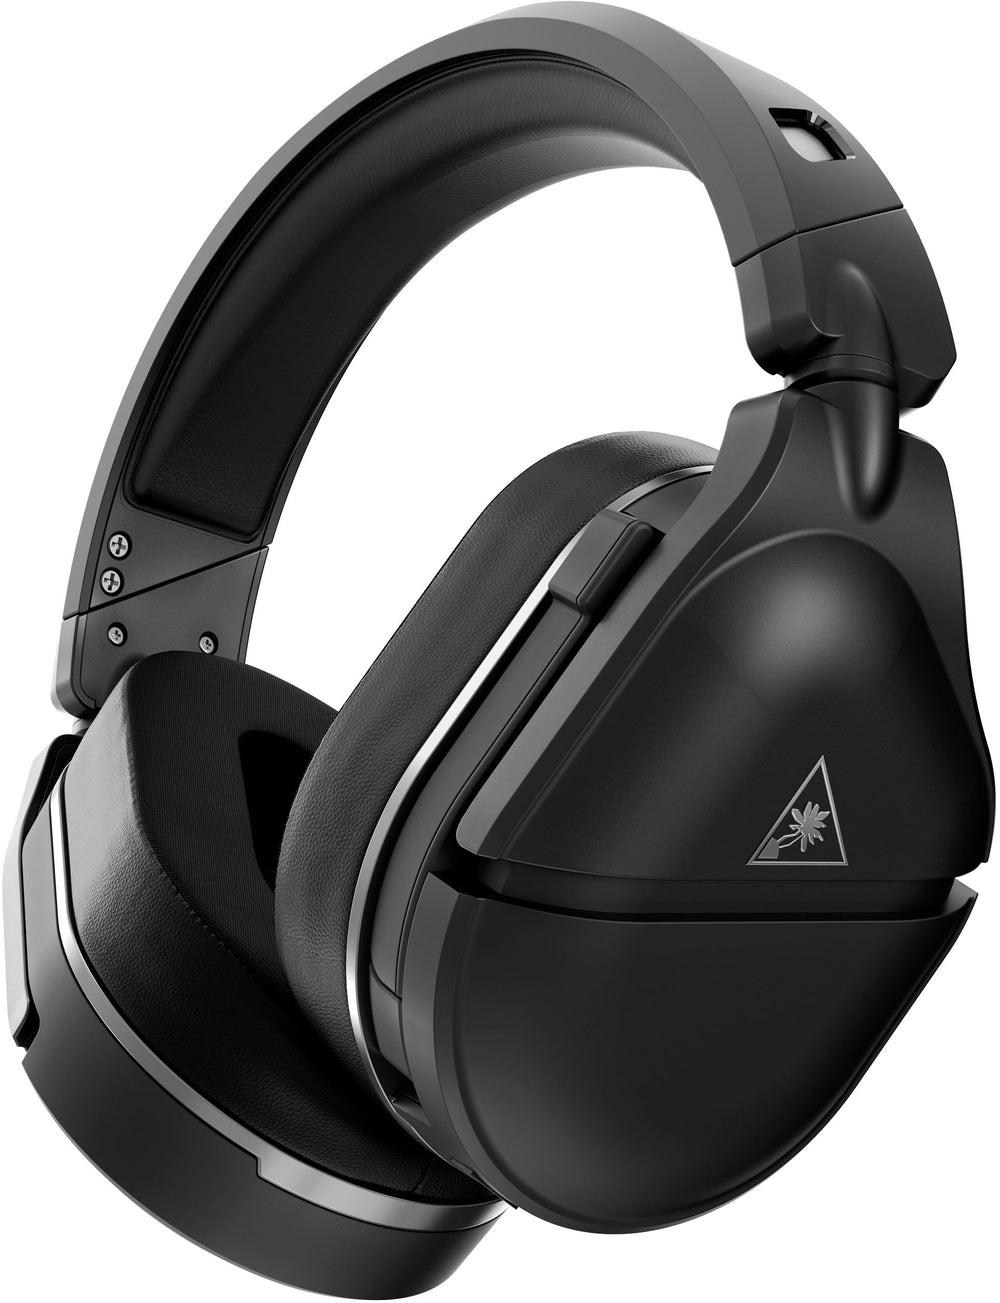 Turtle Beach - Stealth 700 Gen 2 MAX Wireless Multiplatform Gaming Headset for Xbox, PS5, PS4, Nintendo Switch, PC, 40+ Hour Battery - Black_1